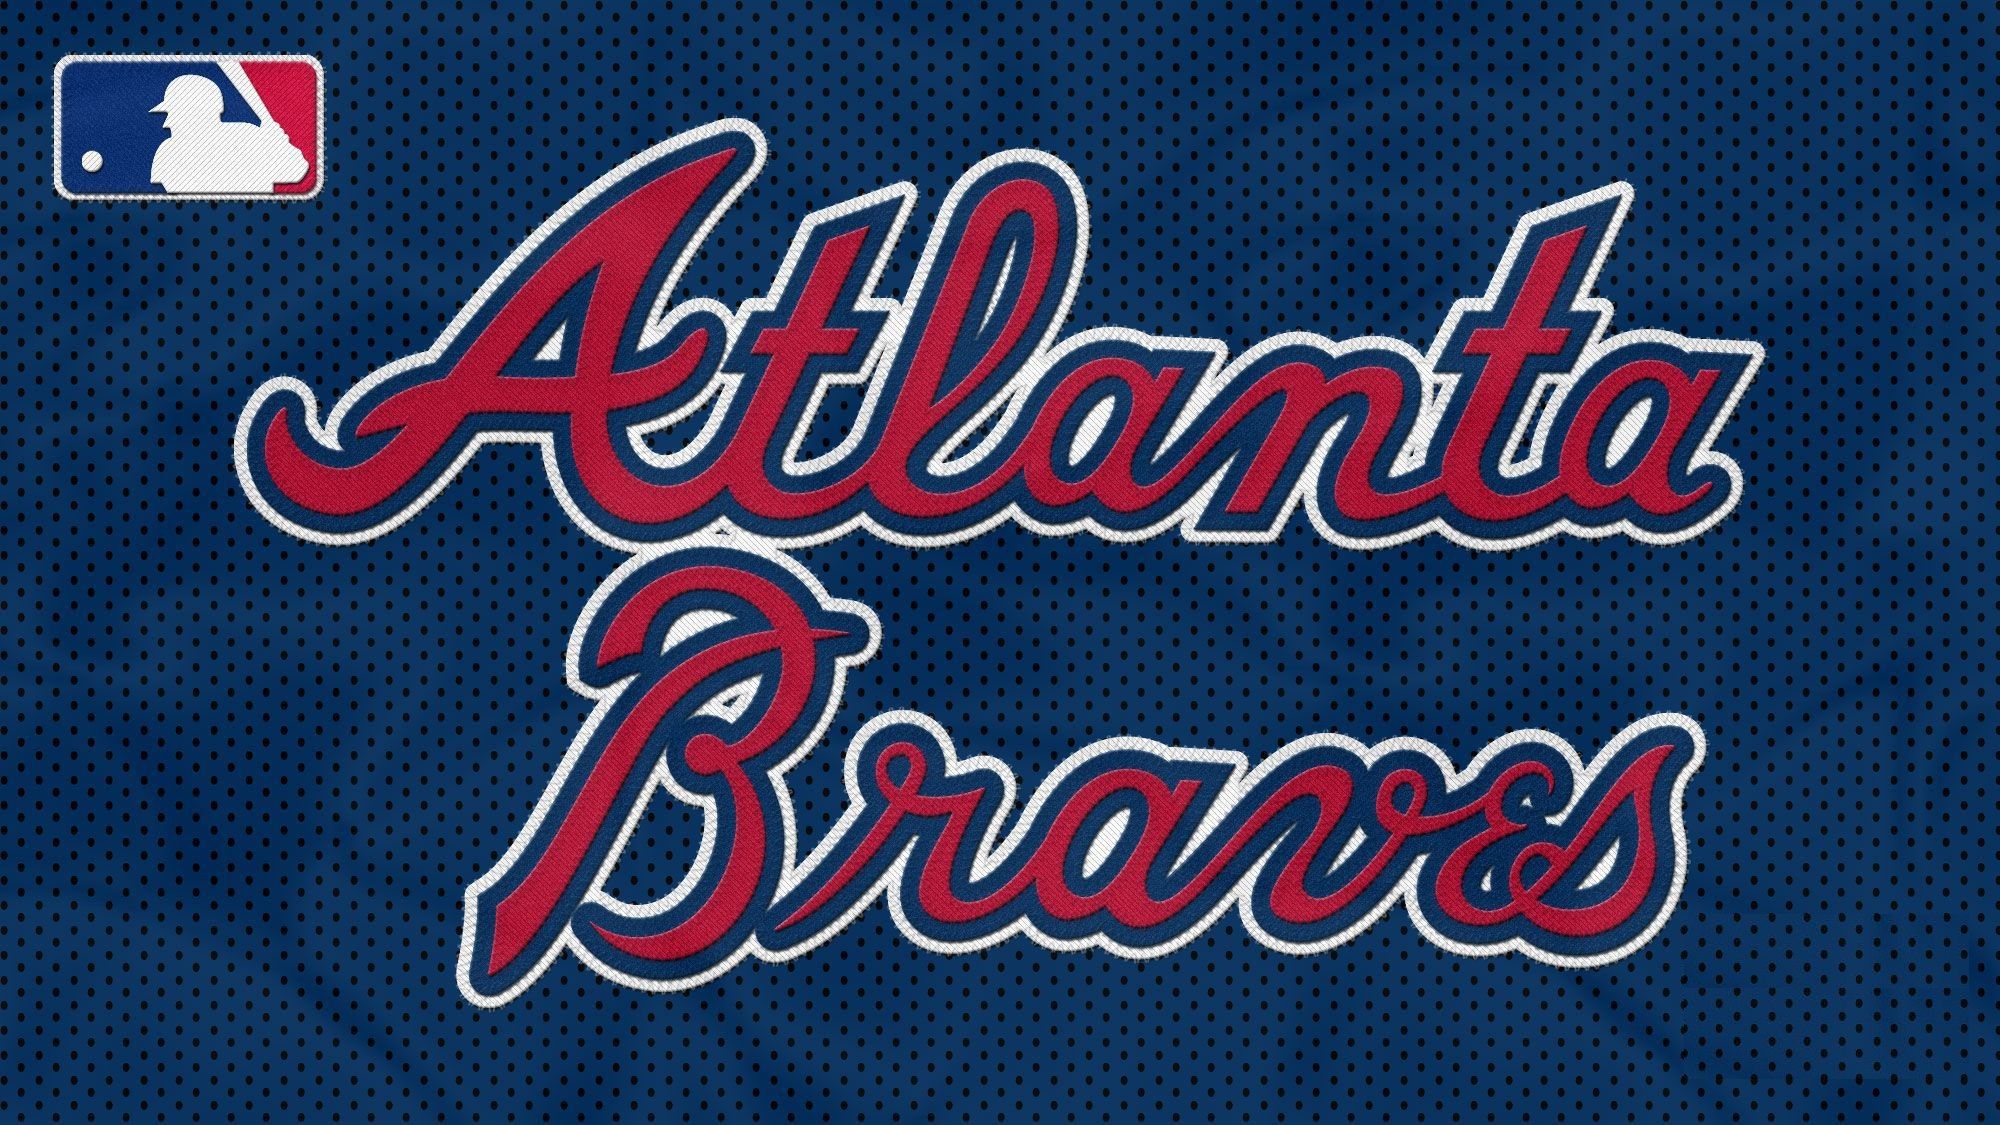 Atlanta Braves Wallpapers Image Photos Pictures Backgrounds.